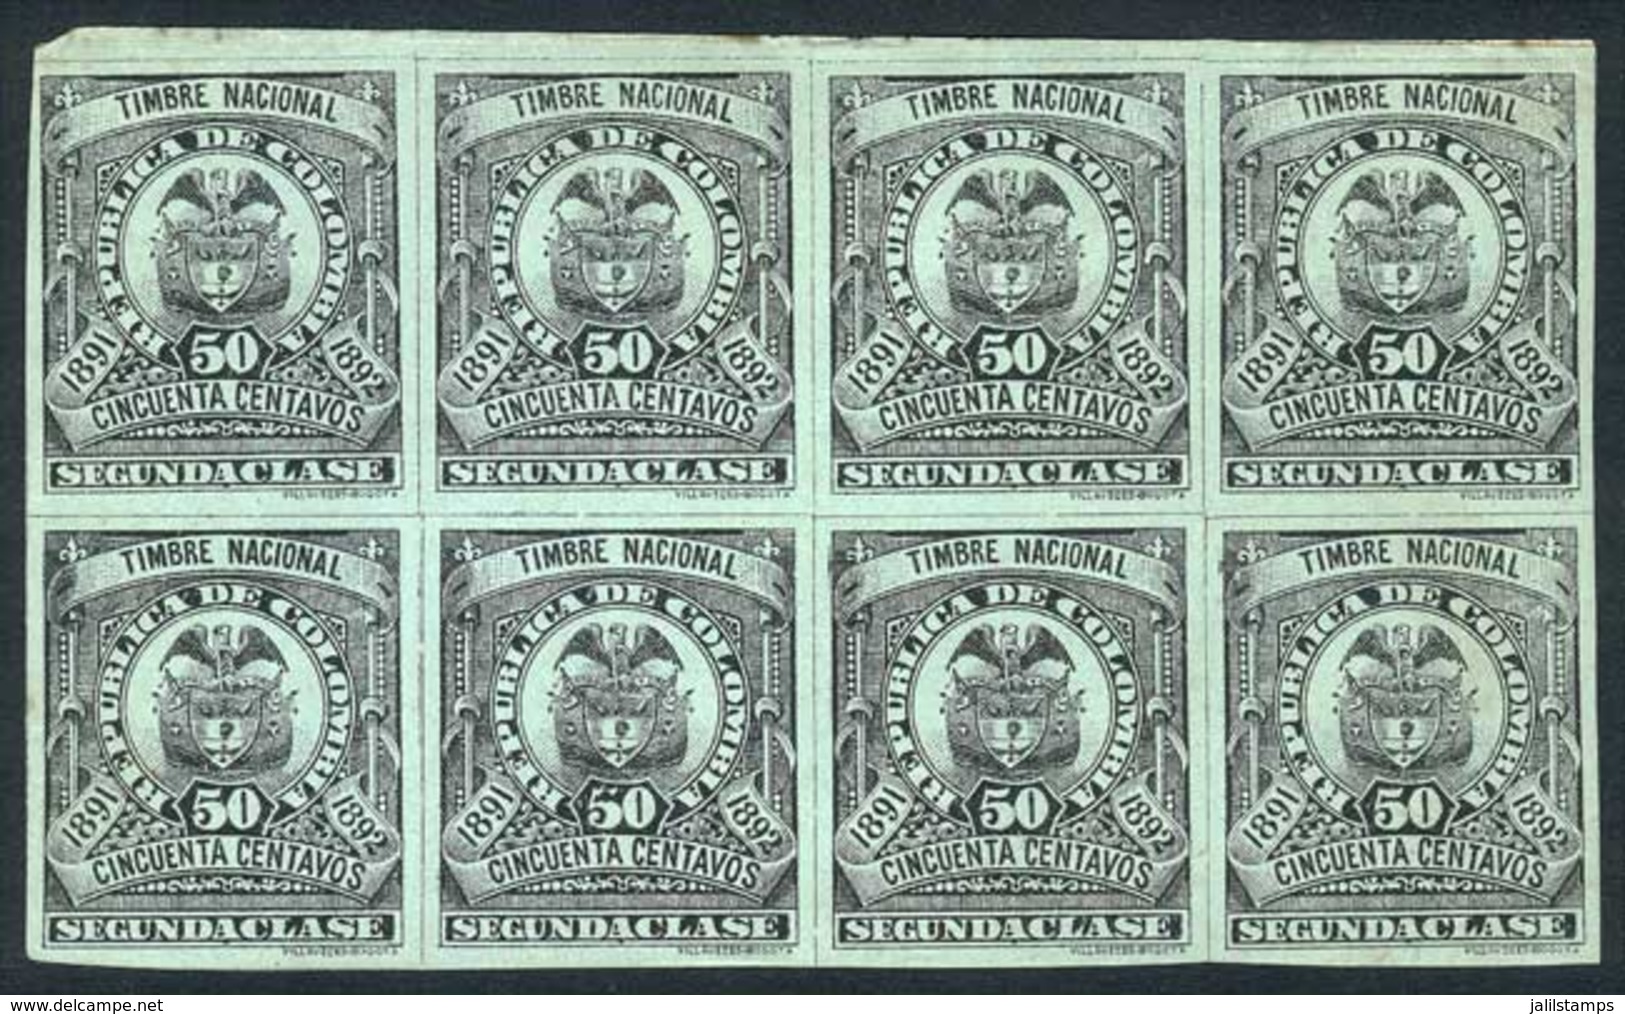 COLOMBIA: Timbre Nacional, 1891-1892 50c. Second Class, Block Of 8 Mint Without Gum, Printed On Paper Of Unsurfaced Fron - Colombia